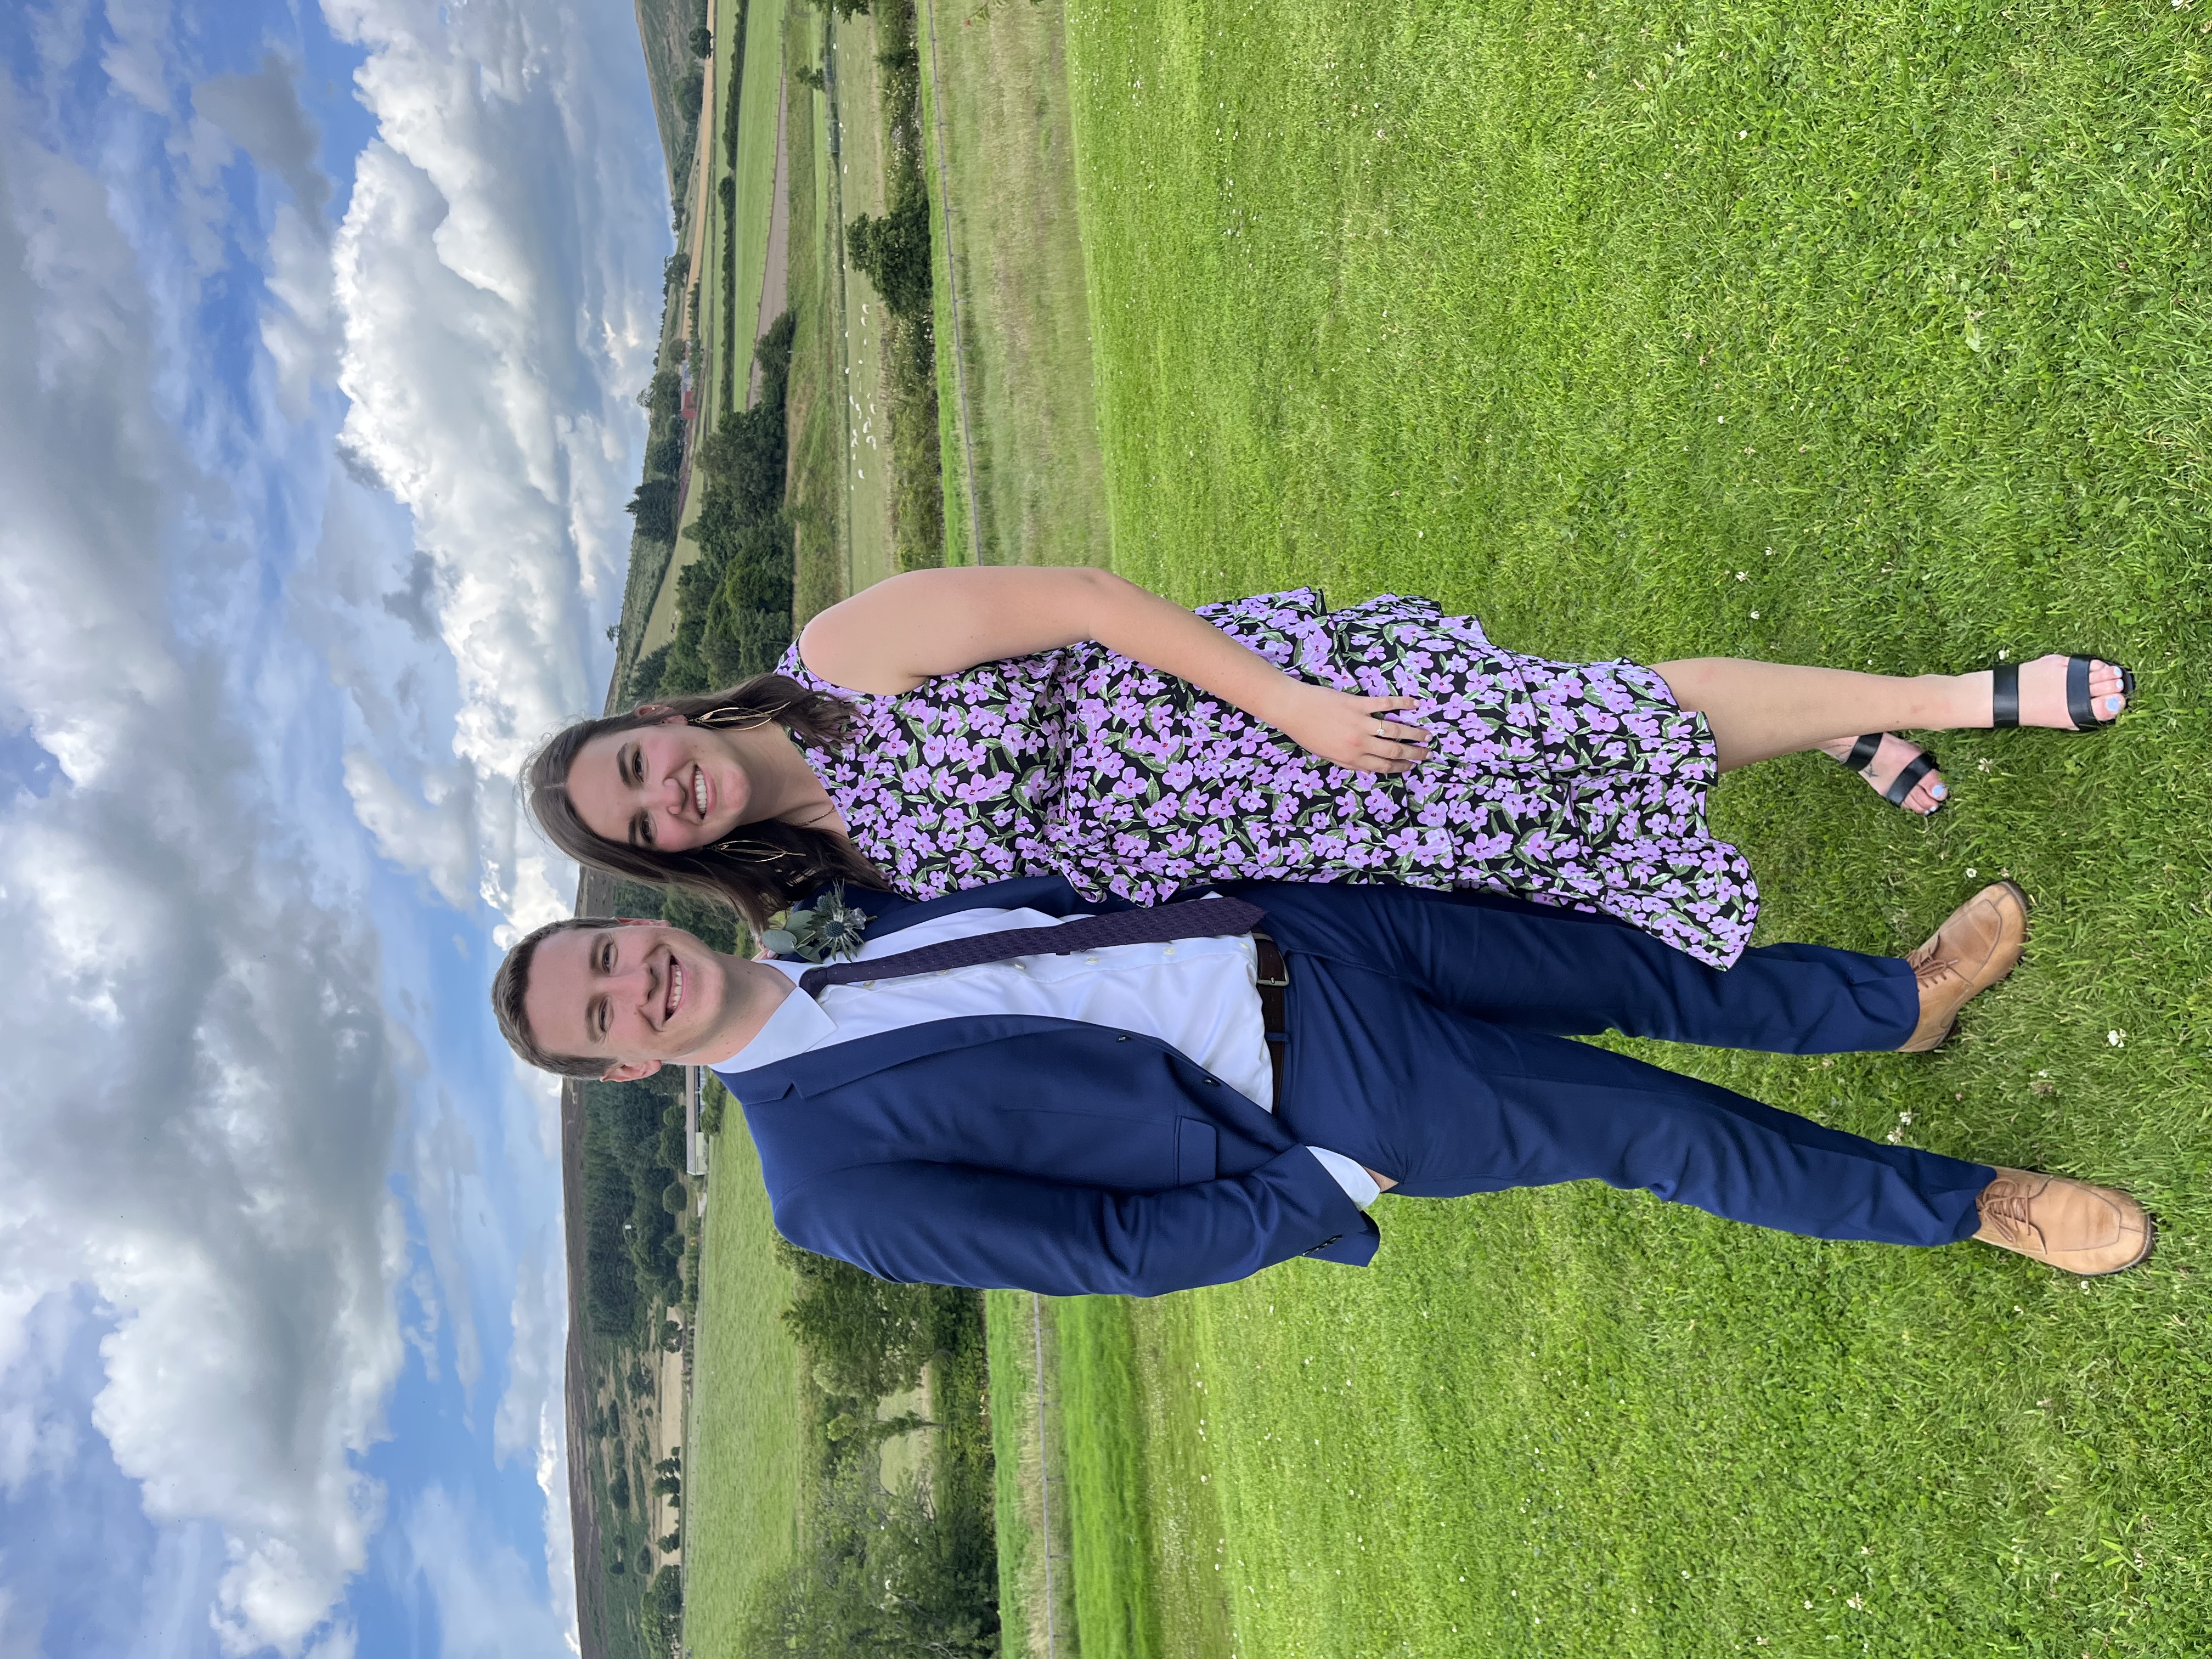 Two people pose in formal attire in a grassy fields surrounded by hills and blue and cloudy sky